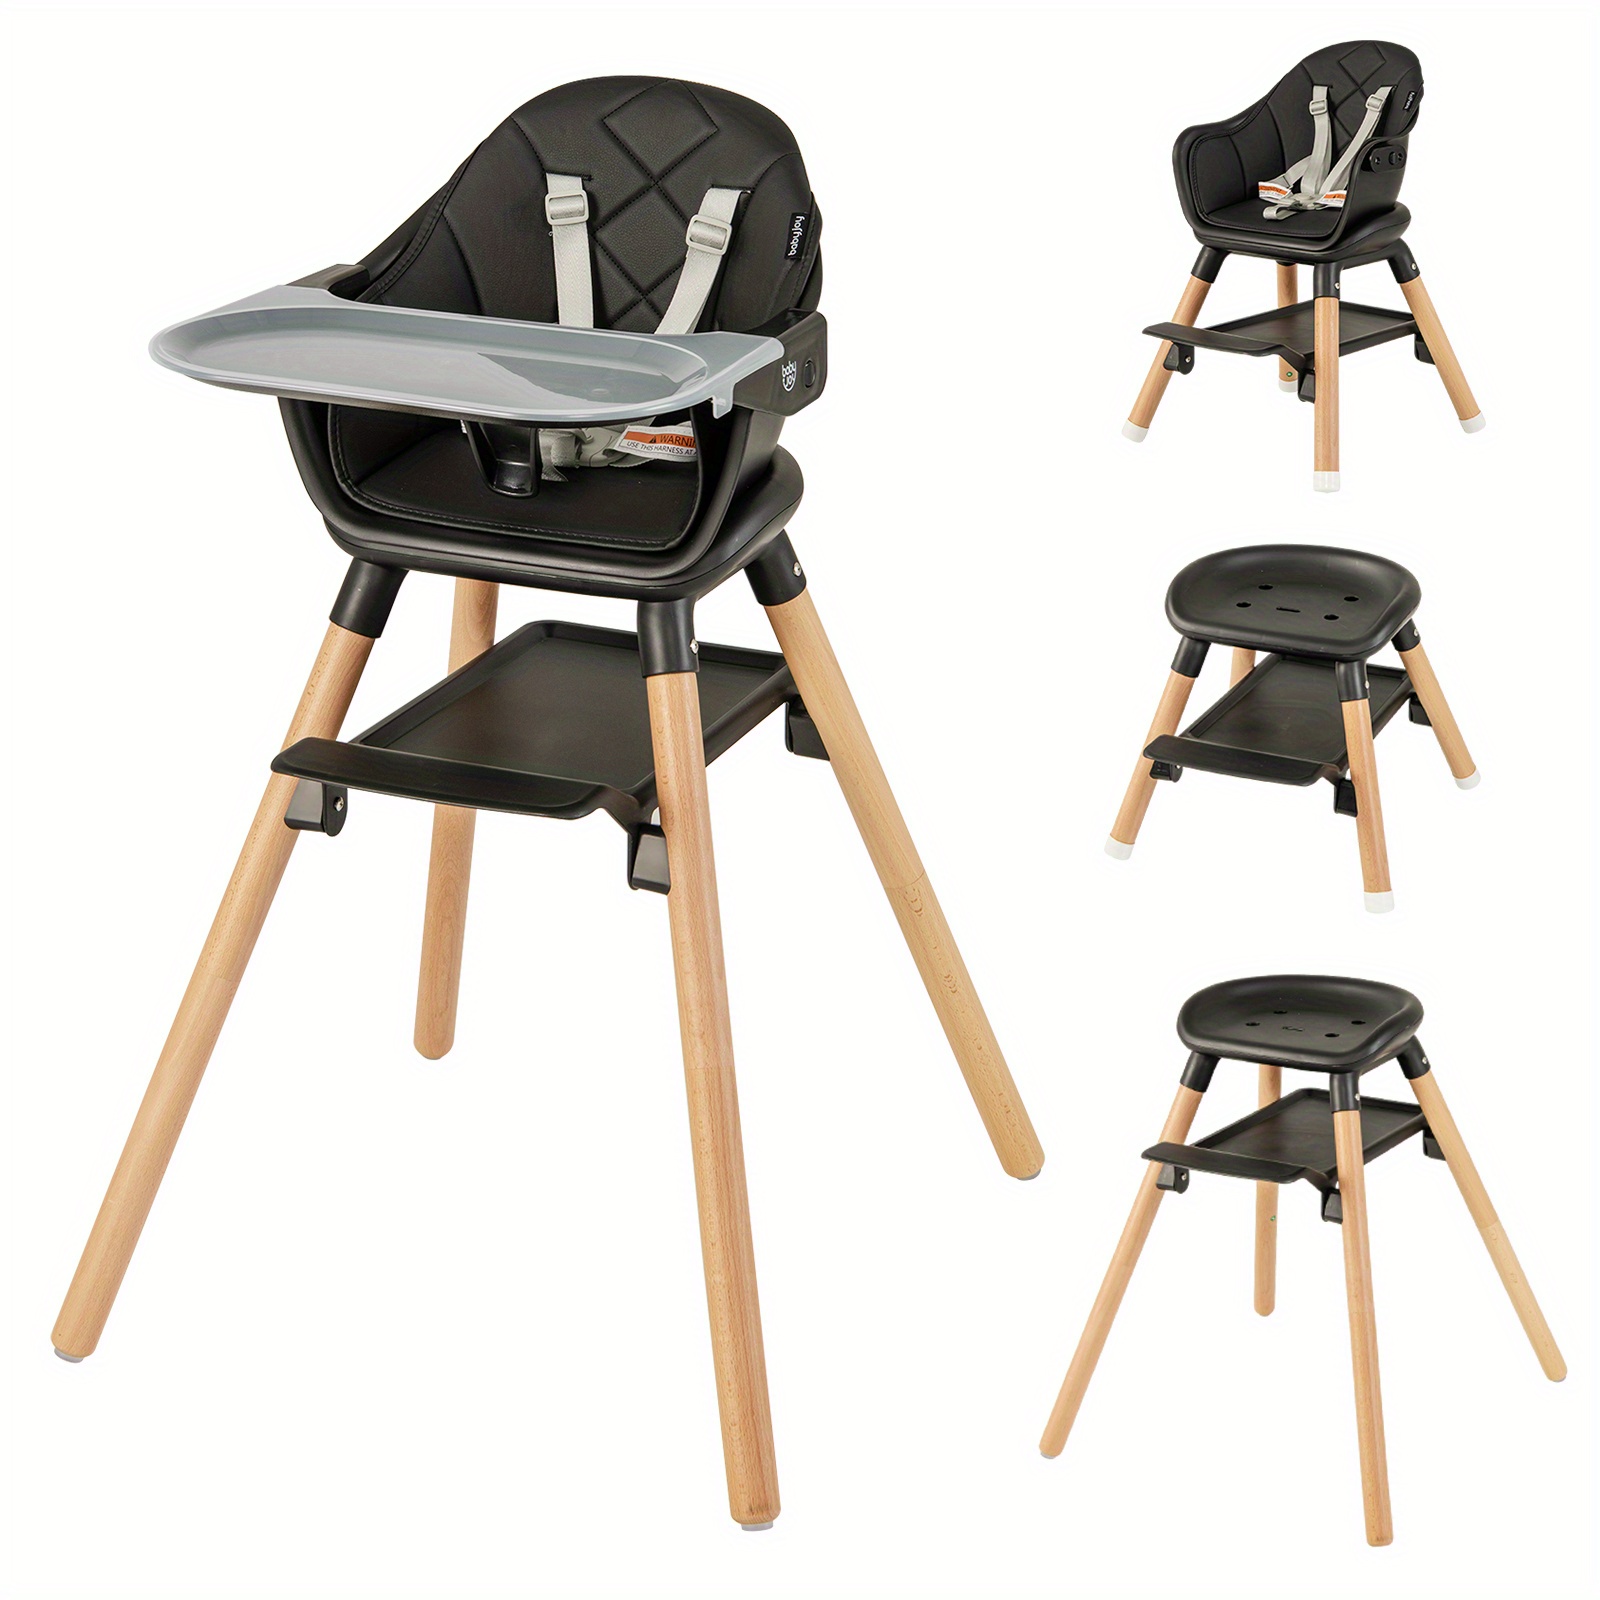 

Safstar 6-in-1 Convertible Wooden Baby Highchair Infant Feeding Chair W/ Removable Tray